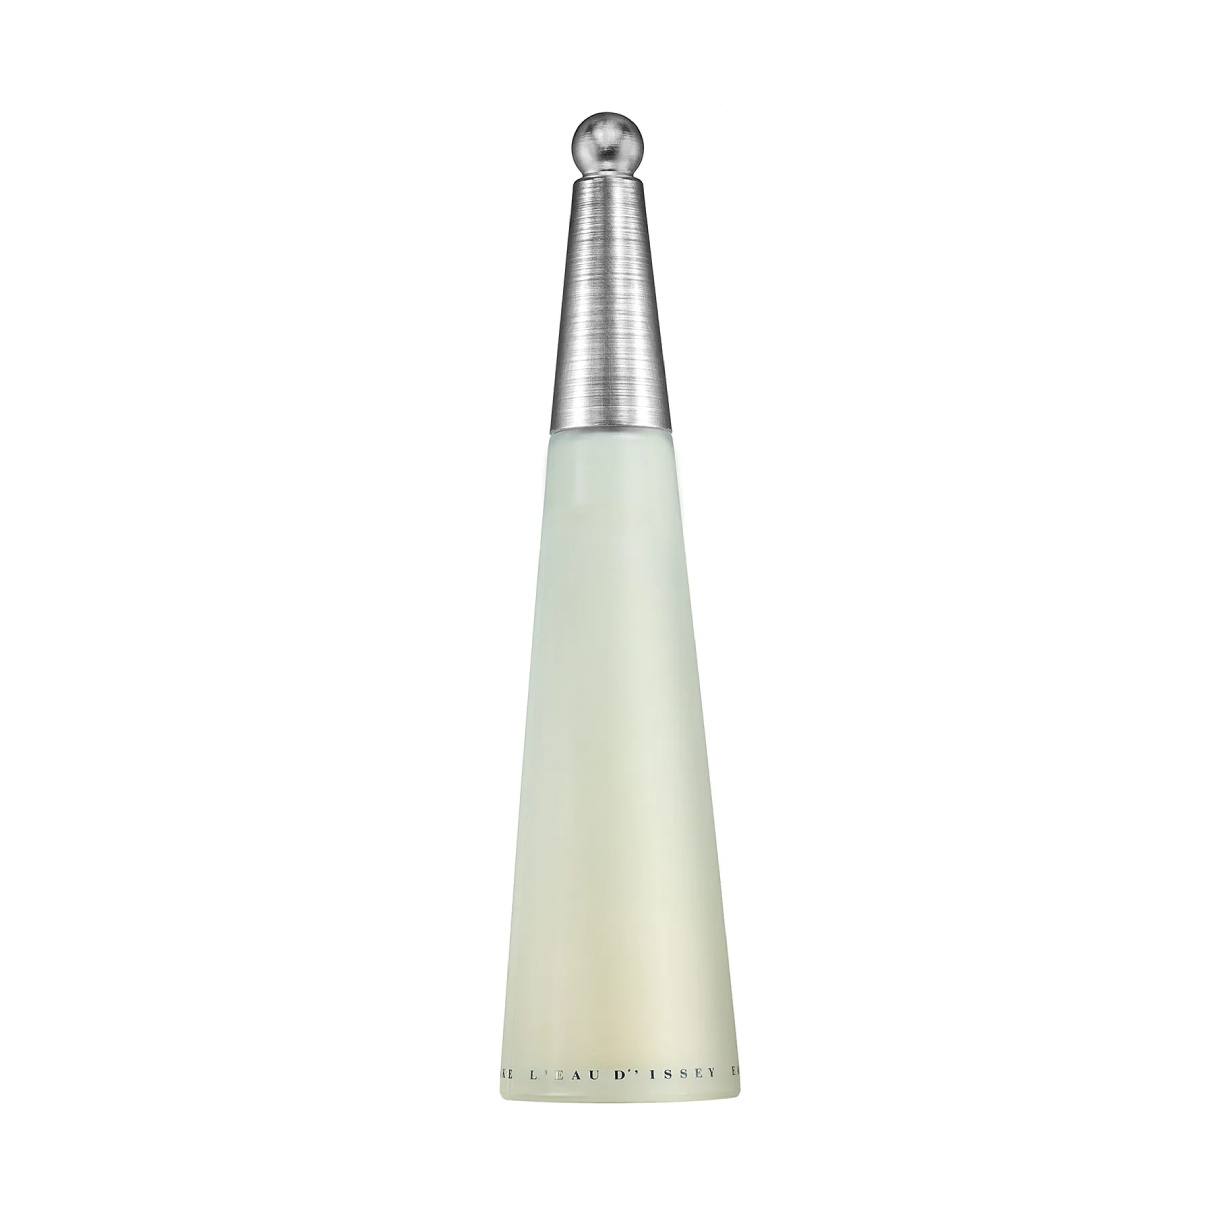 ISSEY MIYAKE L'Eau d'Issey EDT 50 ml